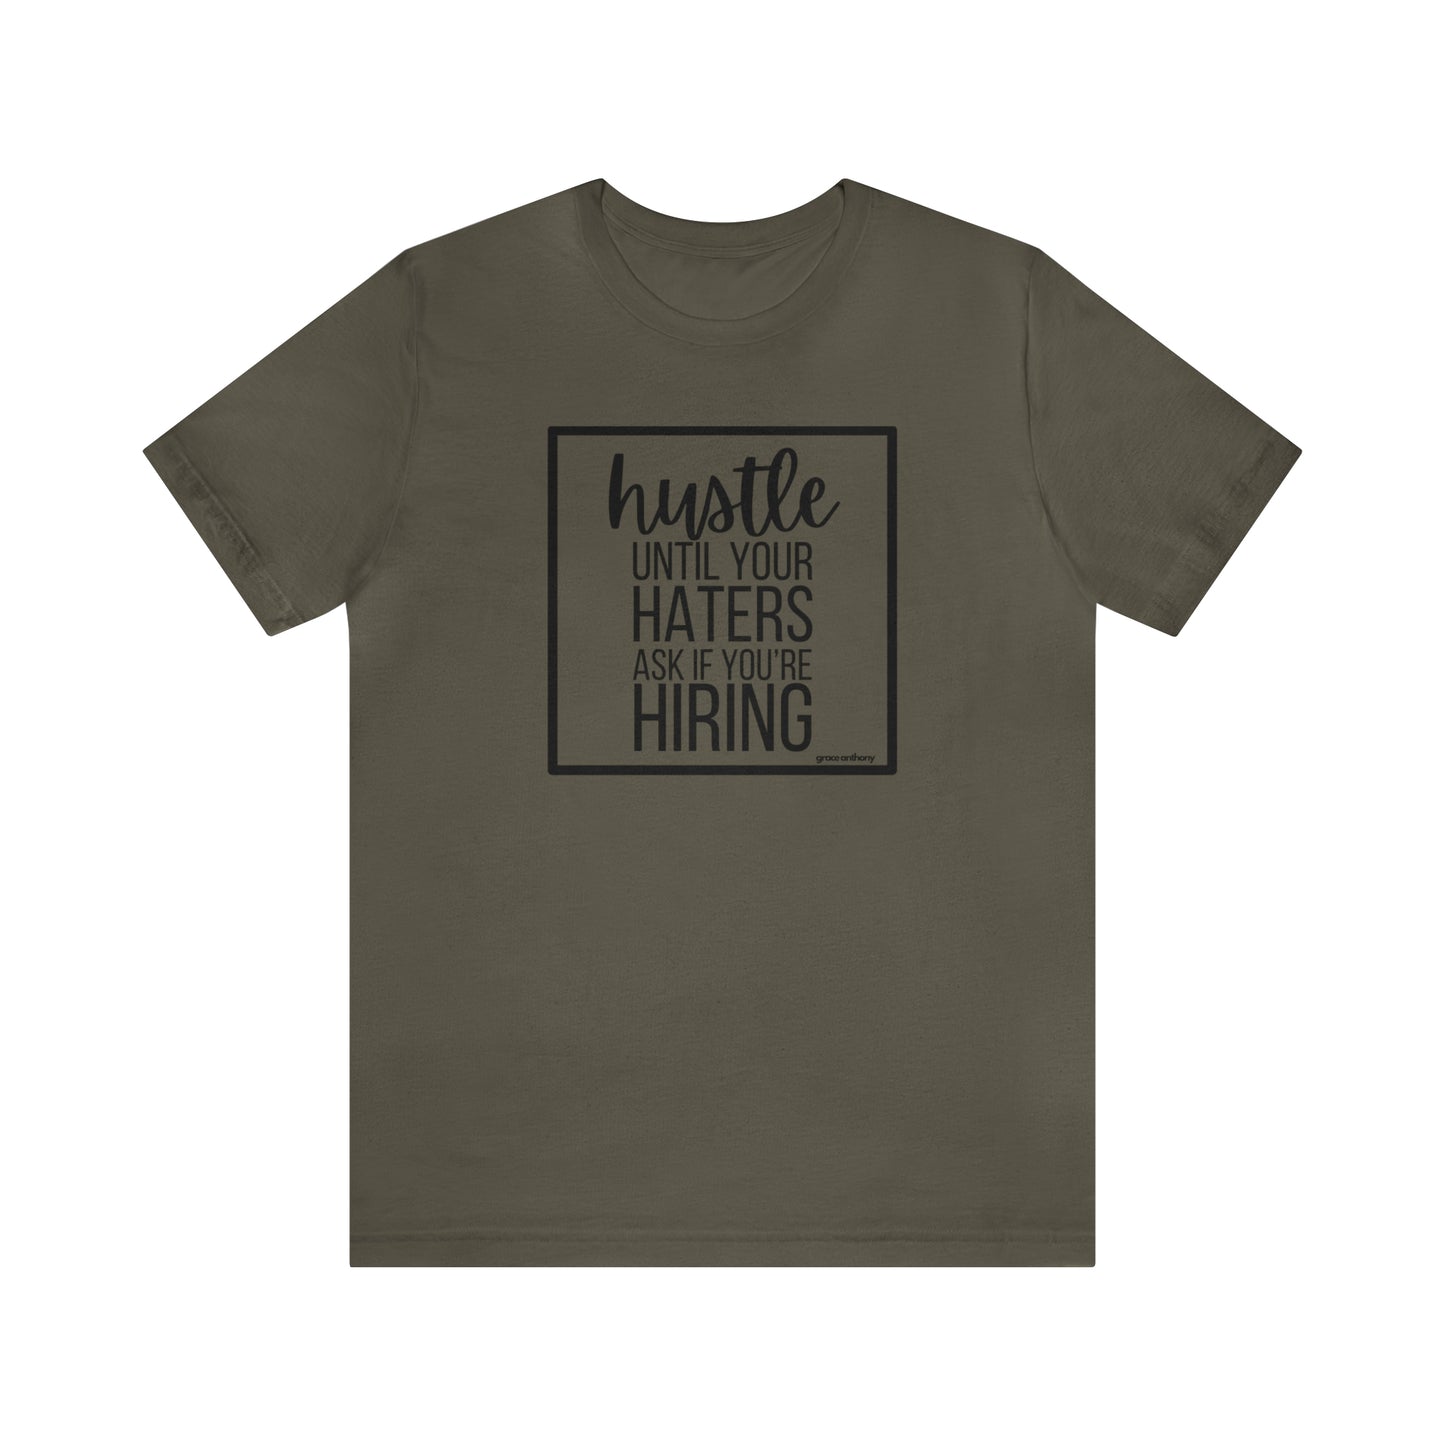 Hustle Until Your Haters Ask if You Are Hiring Shirt, Motivational Shirt, Working Mom Shirt, Small Business T-Shirt, Gift for Business Owner